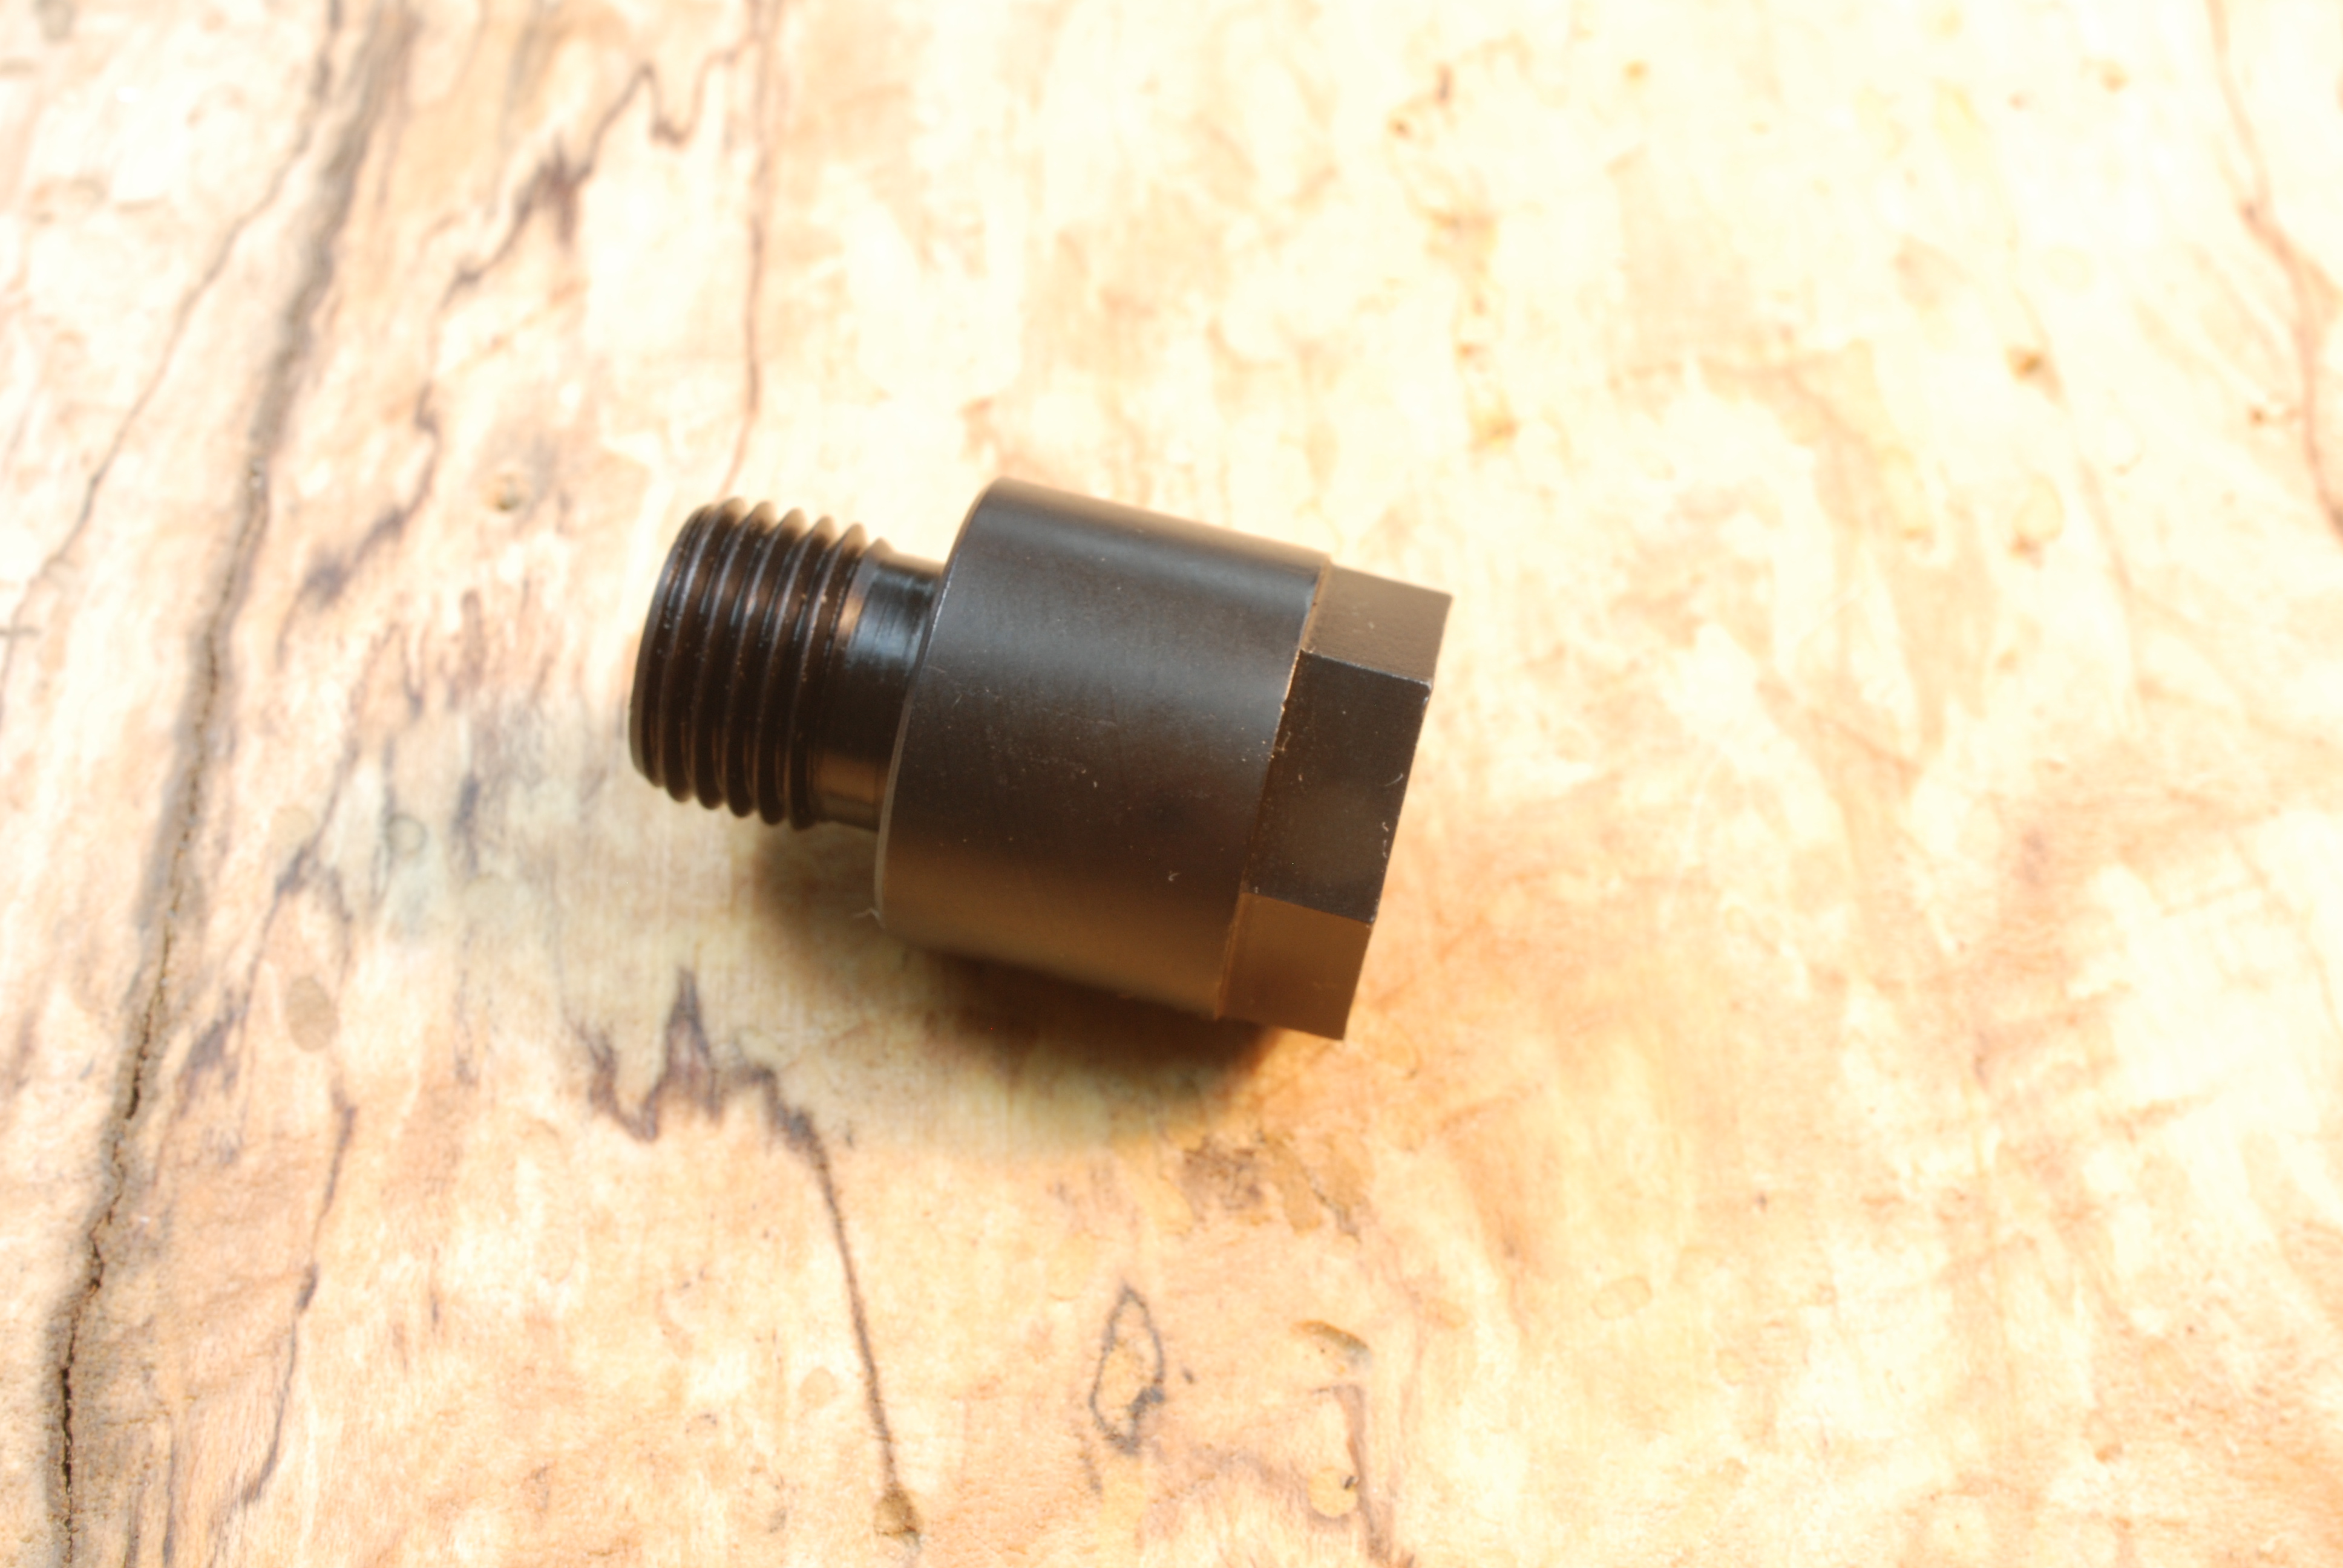 Details about   Barrel End Threaded Adapter Female 1/2-20 UNF To Male 1/2-28 UNEF Female 1/2-28 